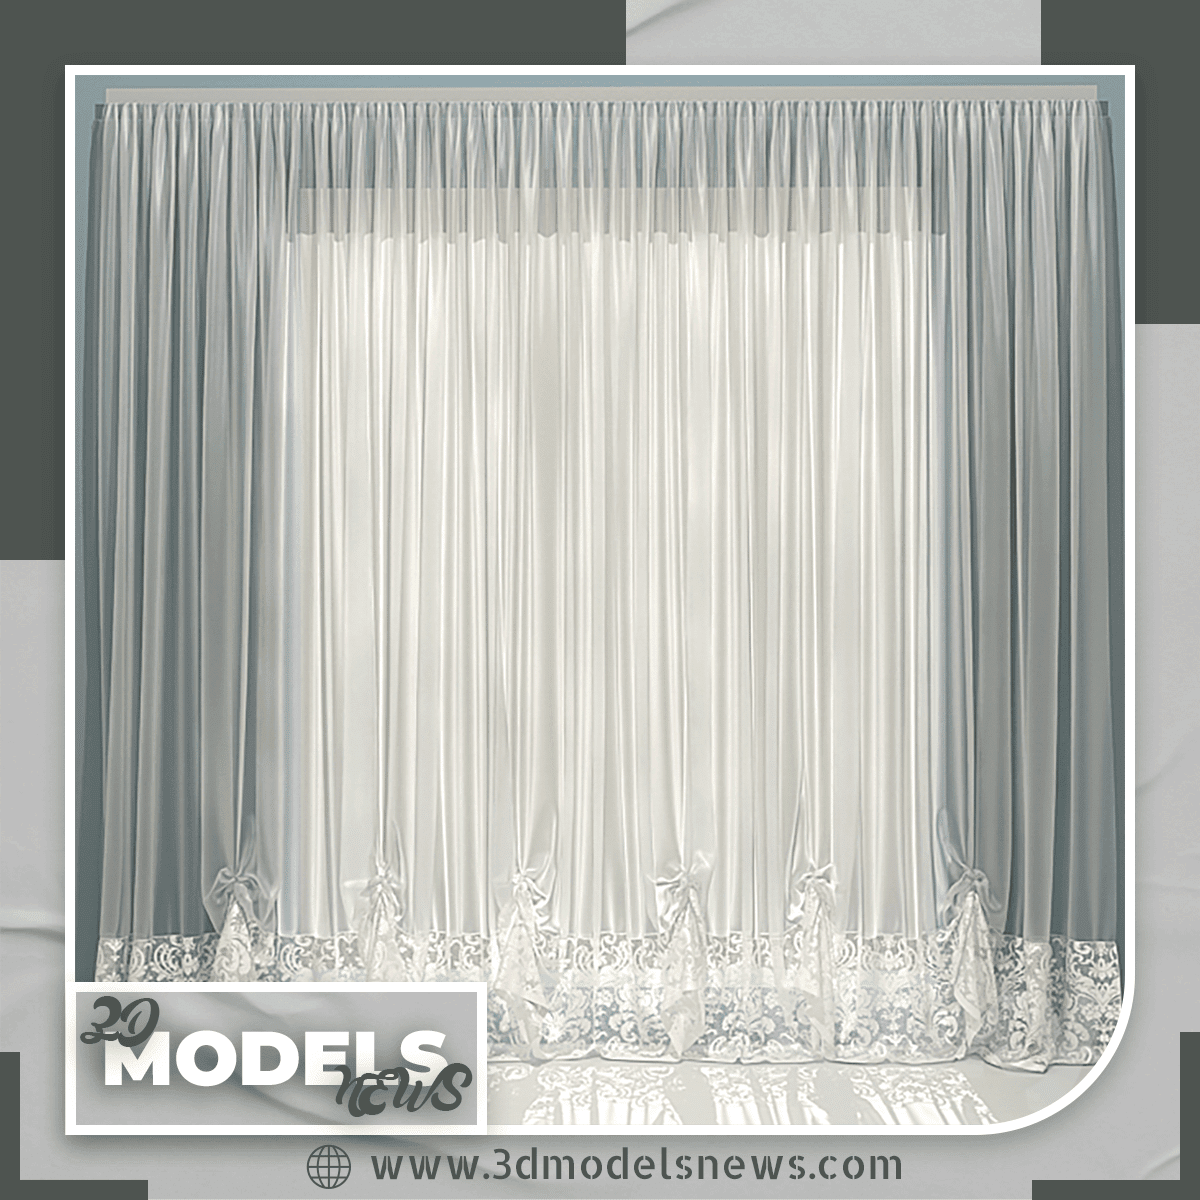 Curtain model tulle with lace